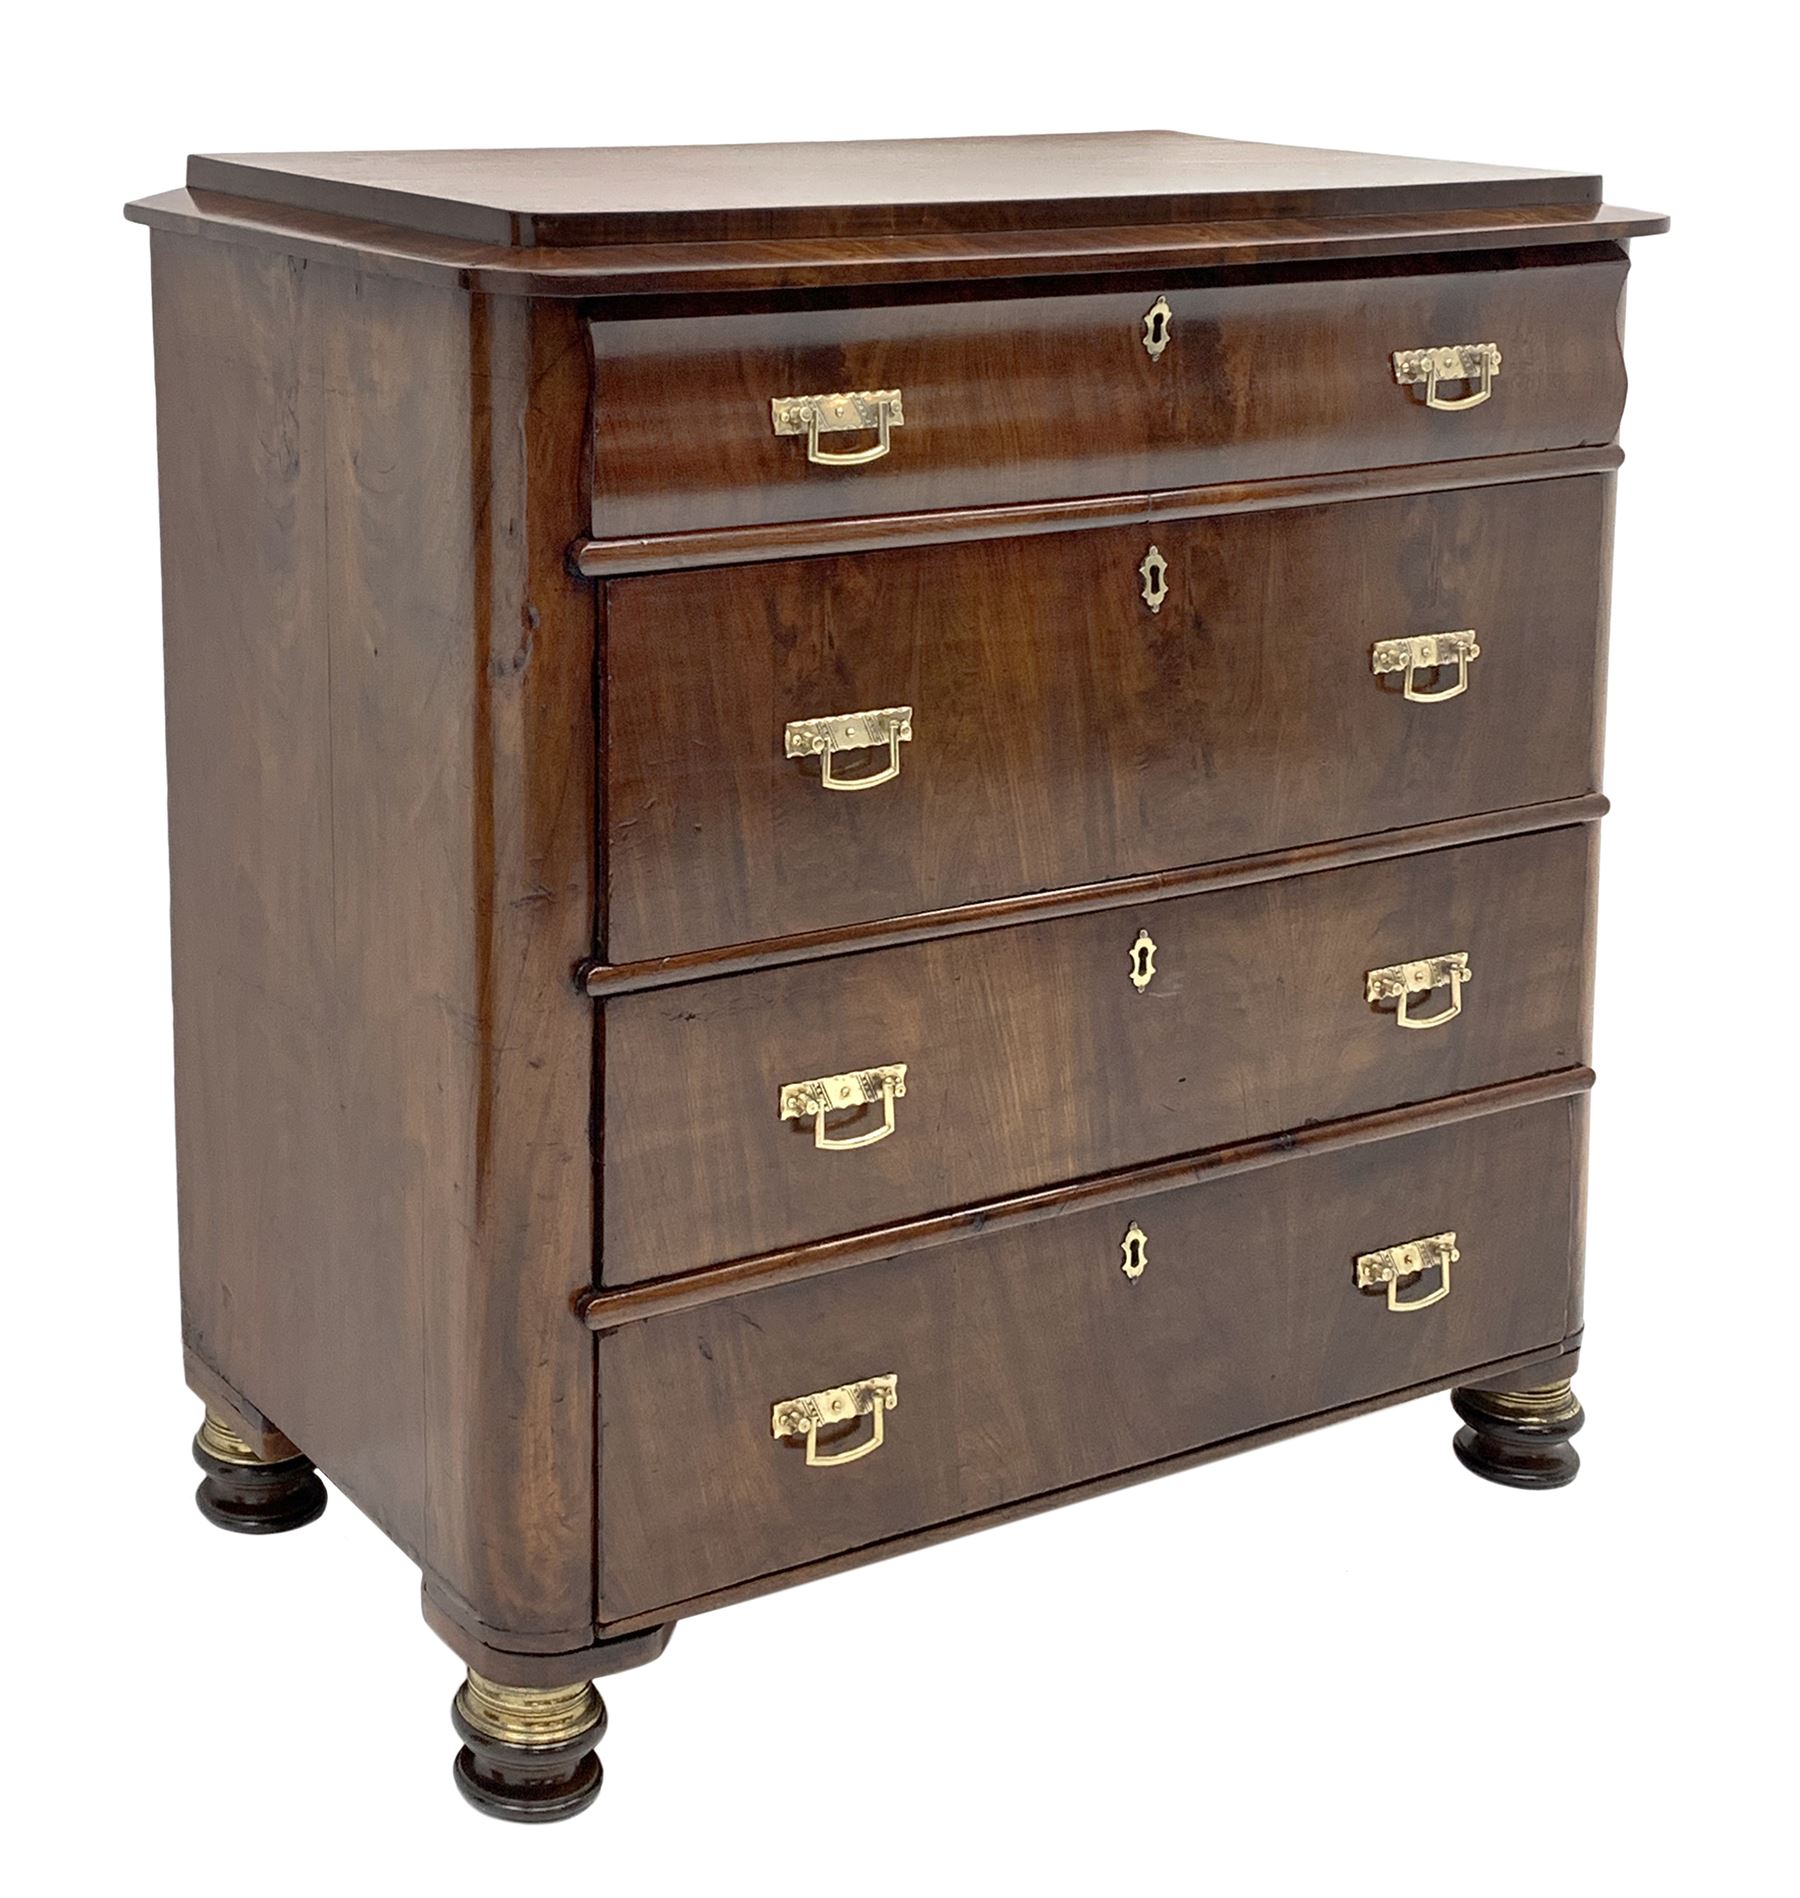 19th century figured mahogany chest, stepped rectangular top with quarter matched veneers and rounde